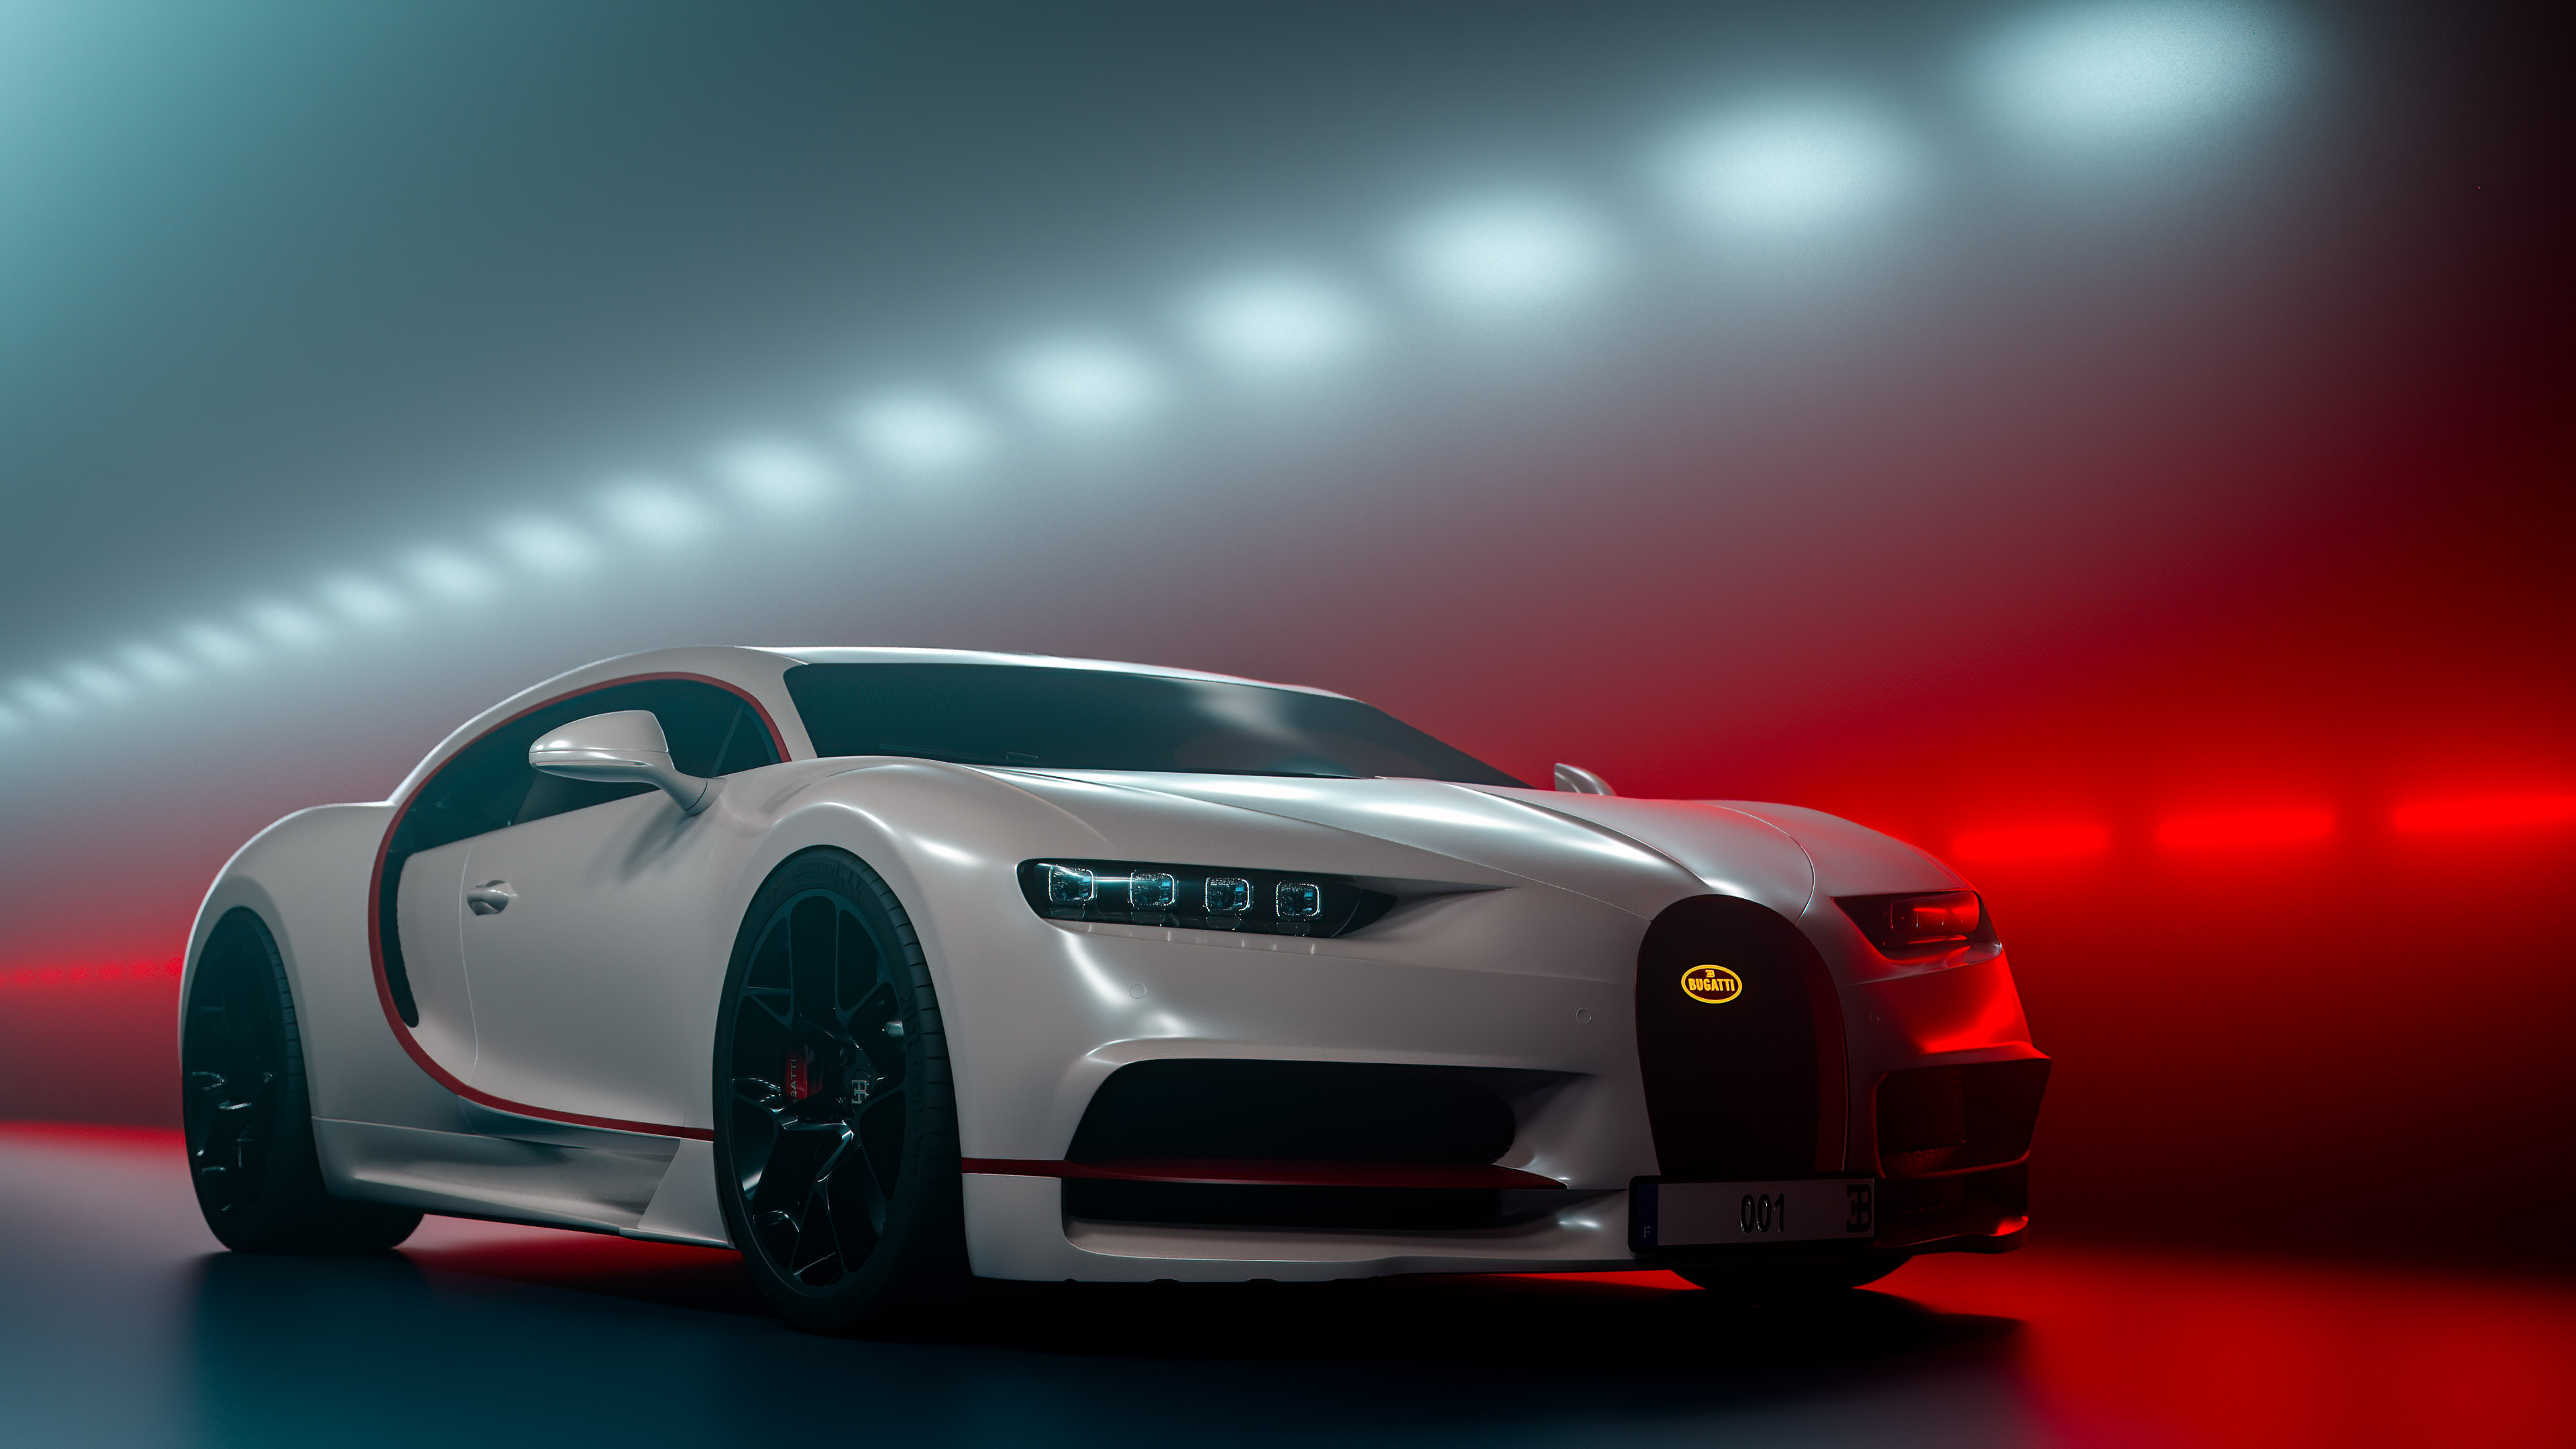 Transform your device's aesthetic with Bugatti Chiron's allure through our captivating car wallpaper 4K collection.